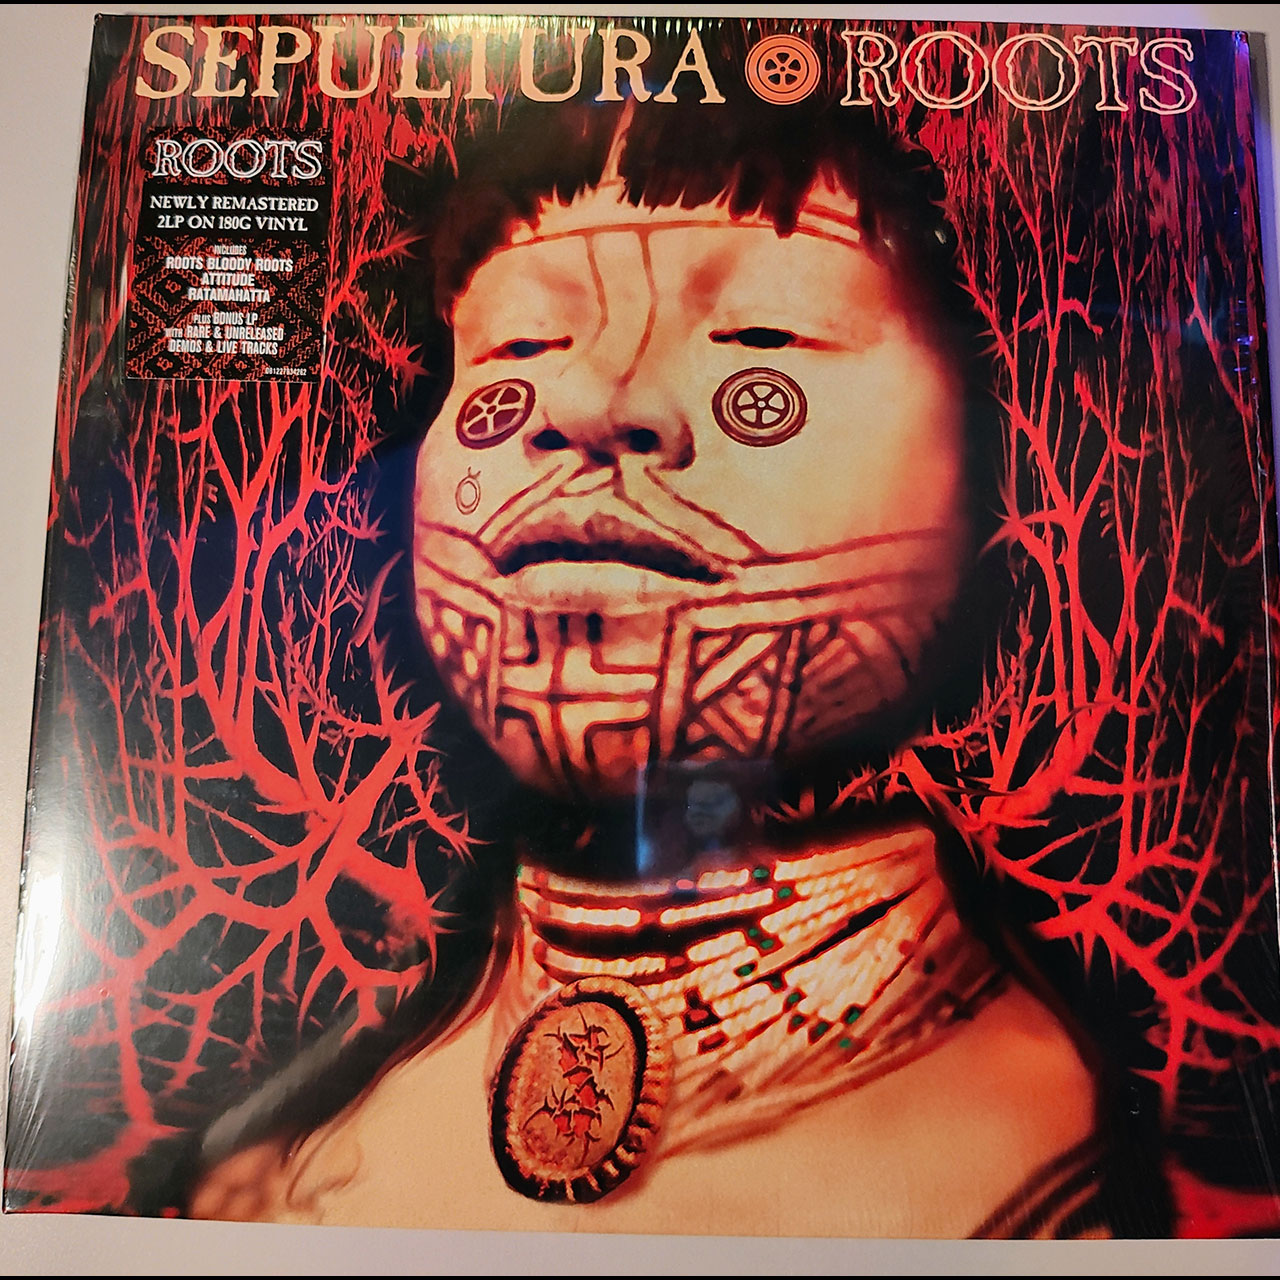 images/record-covers/sepultura_roots.jpg#joomlaImage://local-images/record-covers/sepultura_roots.jpg?width=1280&height=1280